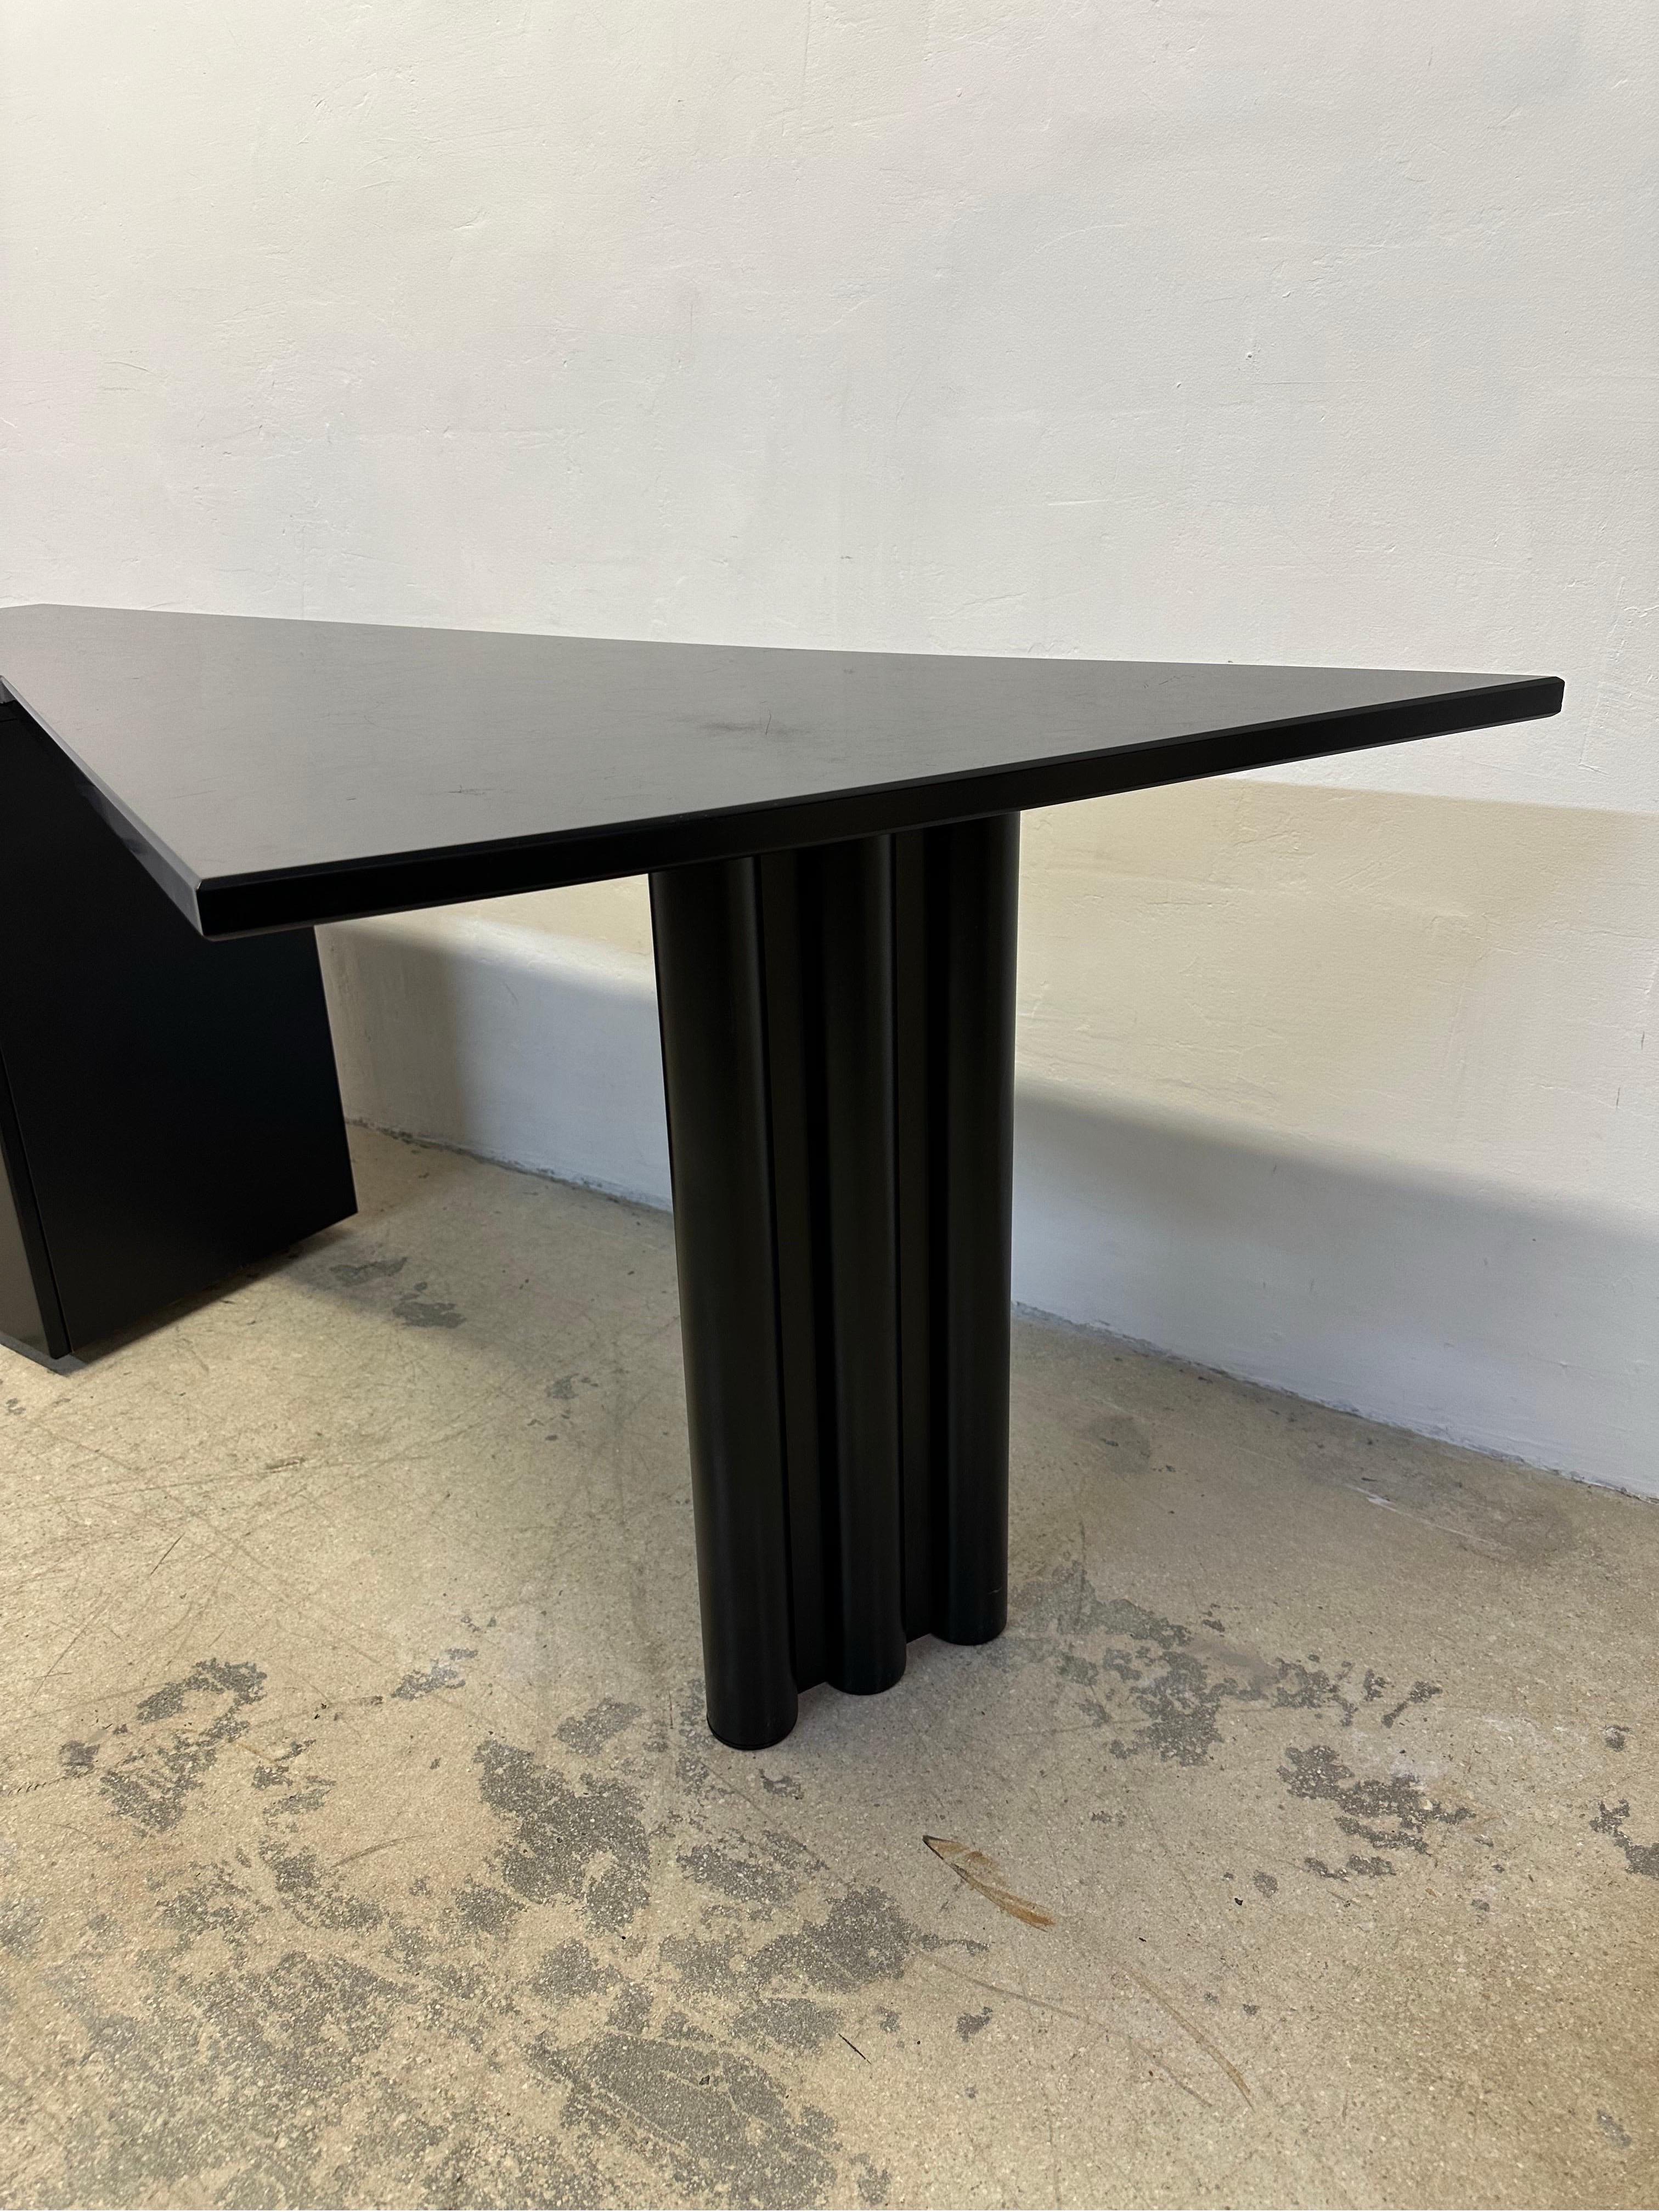 Postmodern Black Lacquered Desk by Interlubke, Germany 1980s For Sale 2